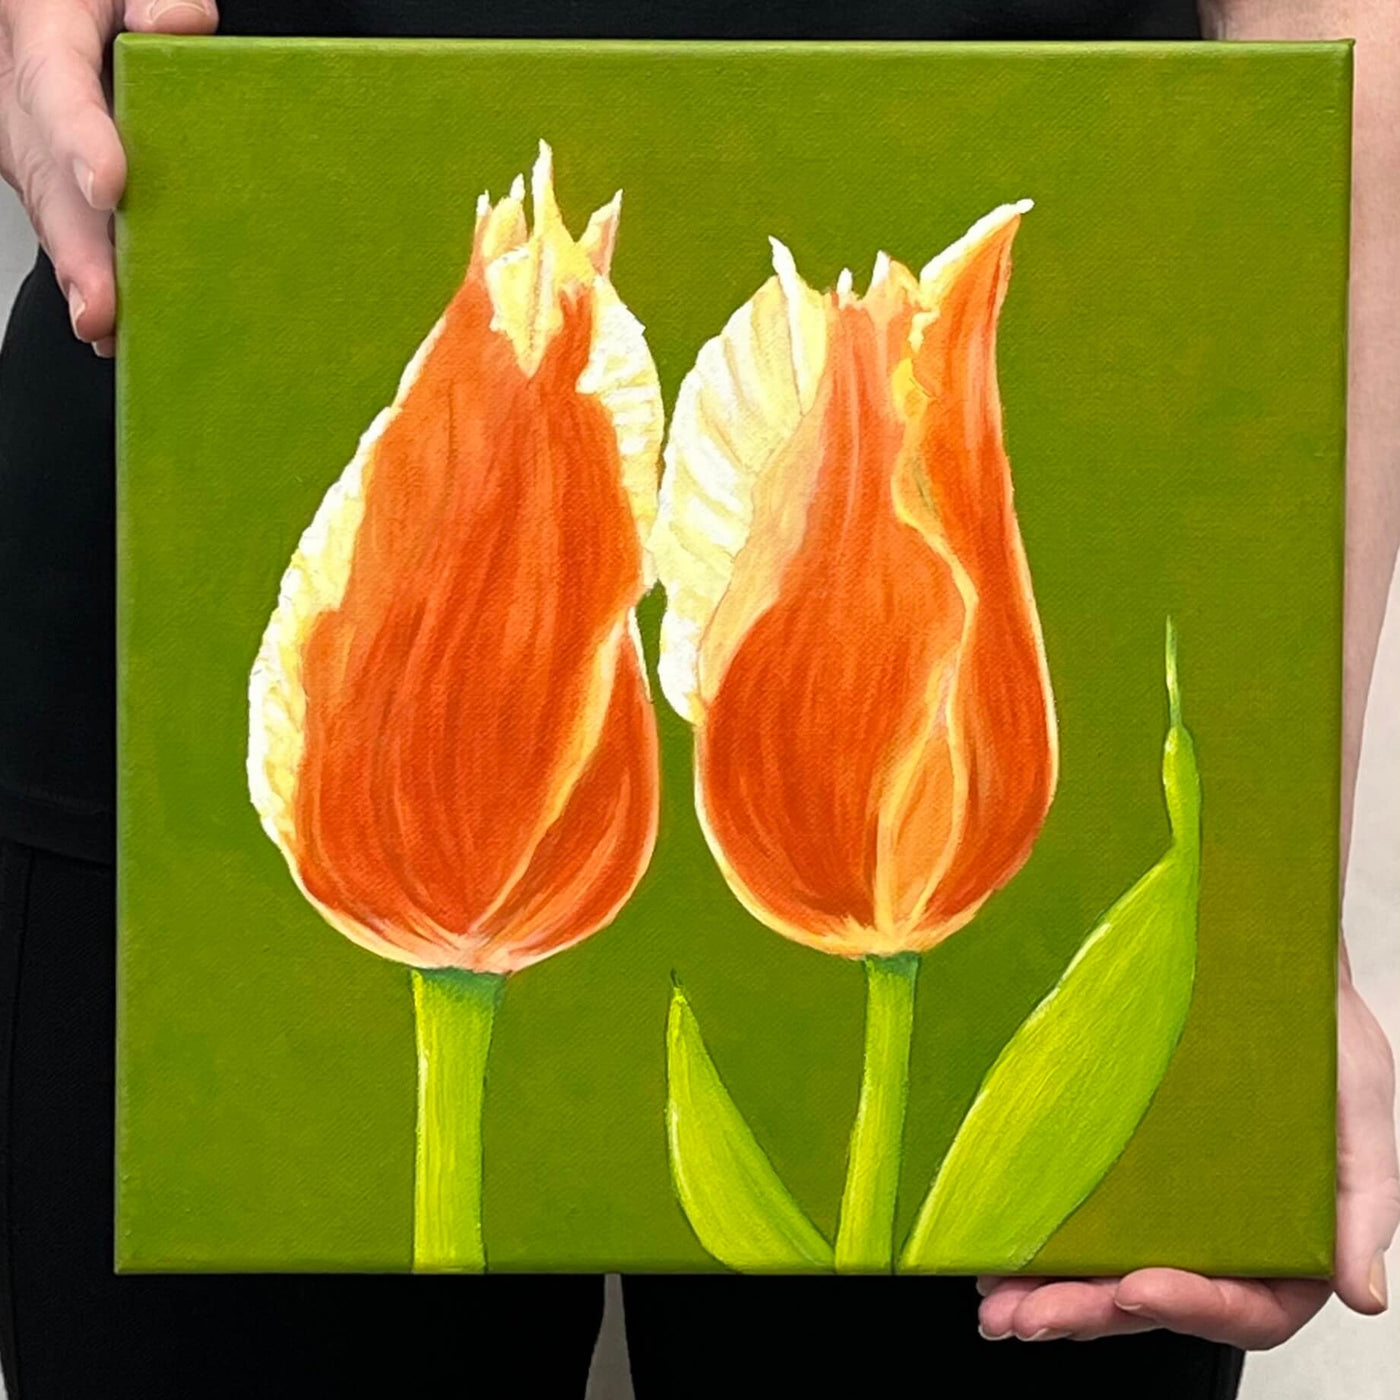 Original - Two tulips on green - 12"H x 12"W x 5/8"D